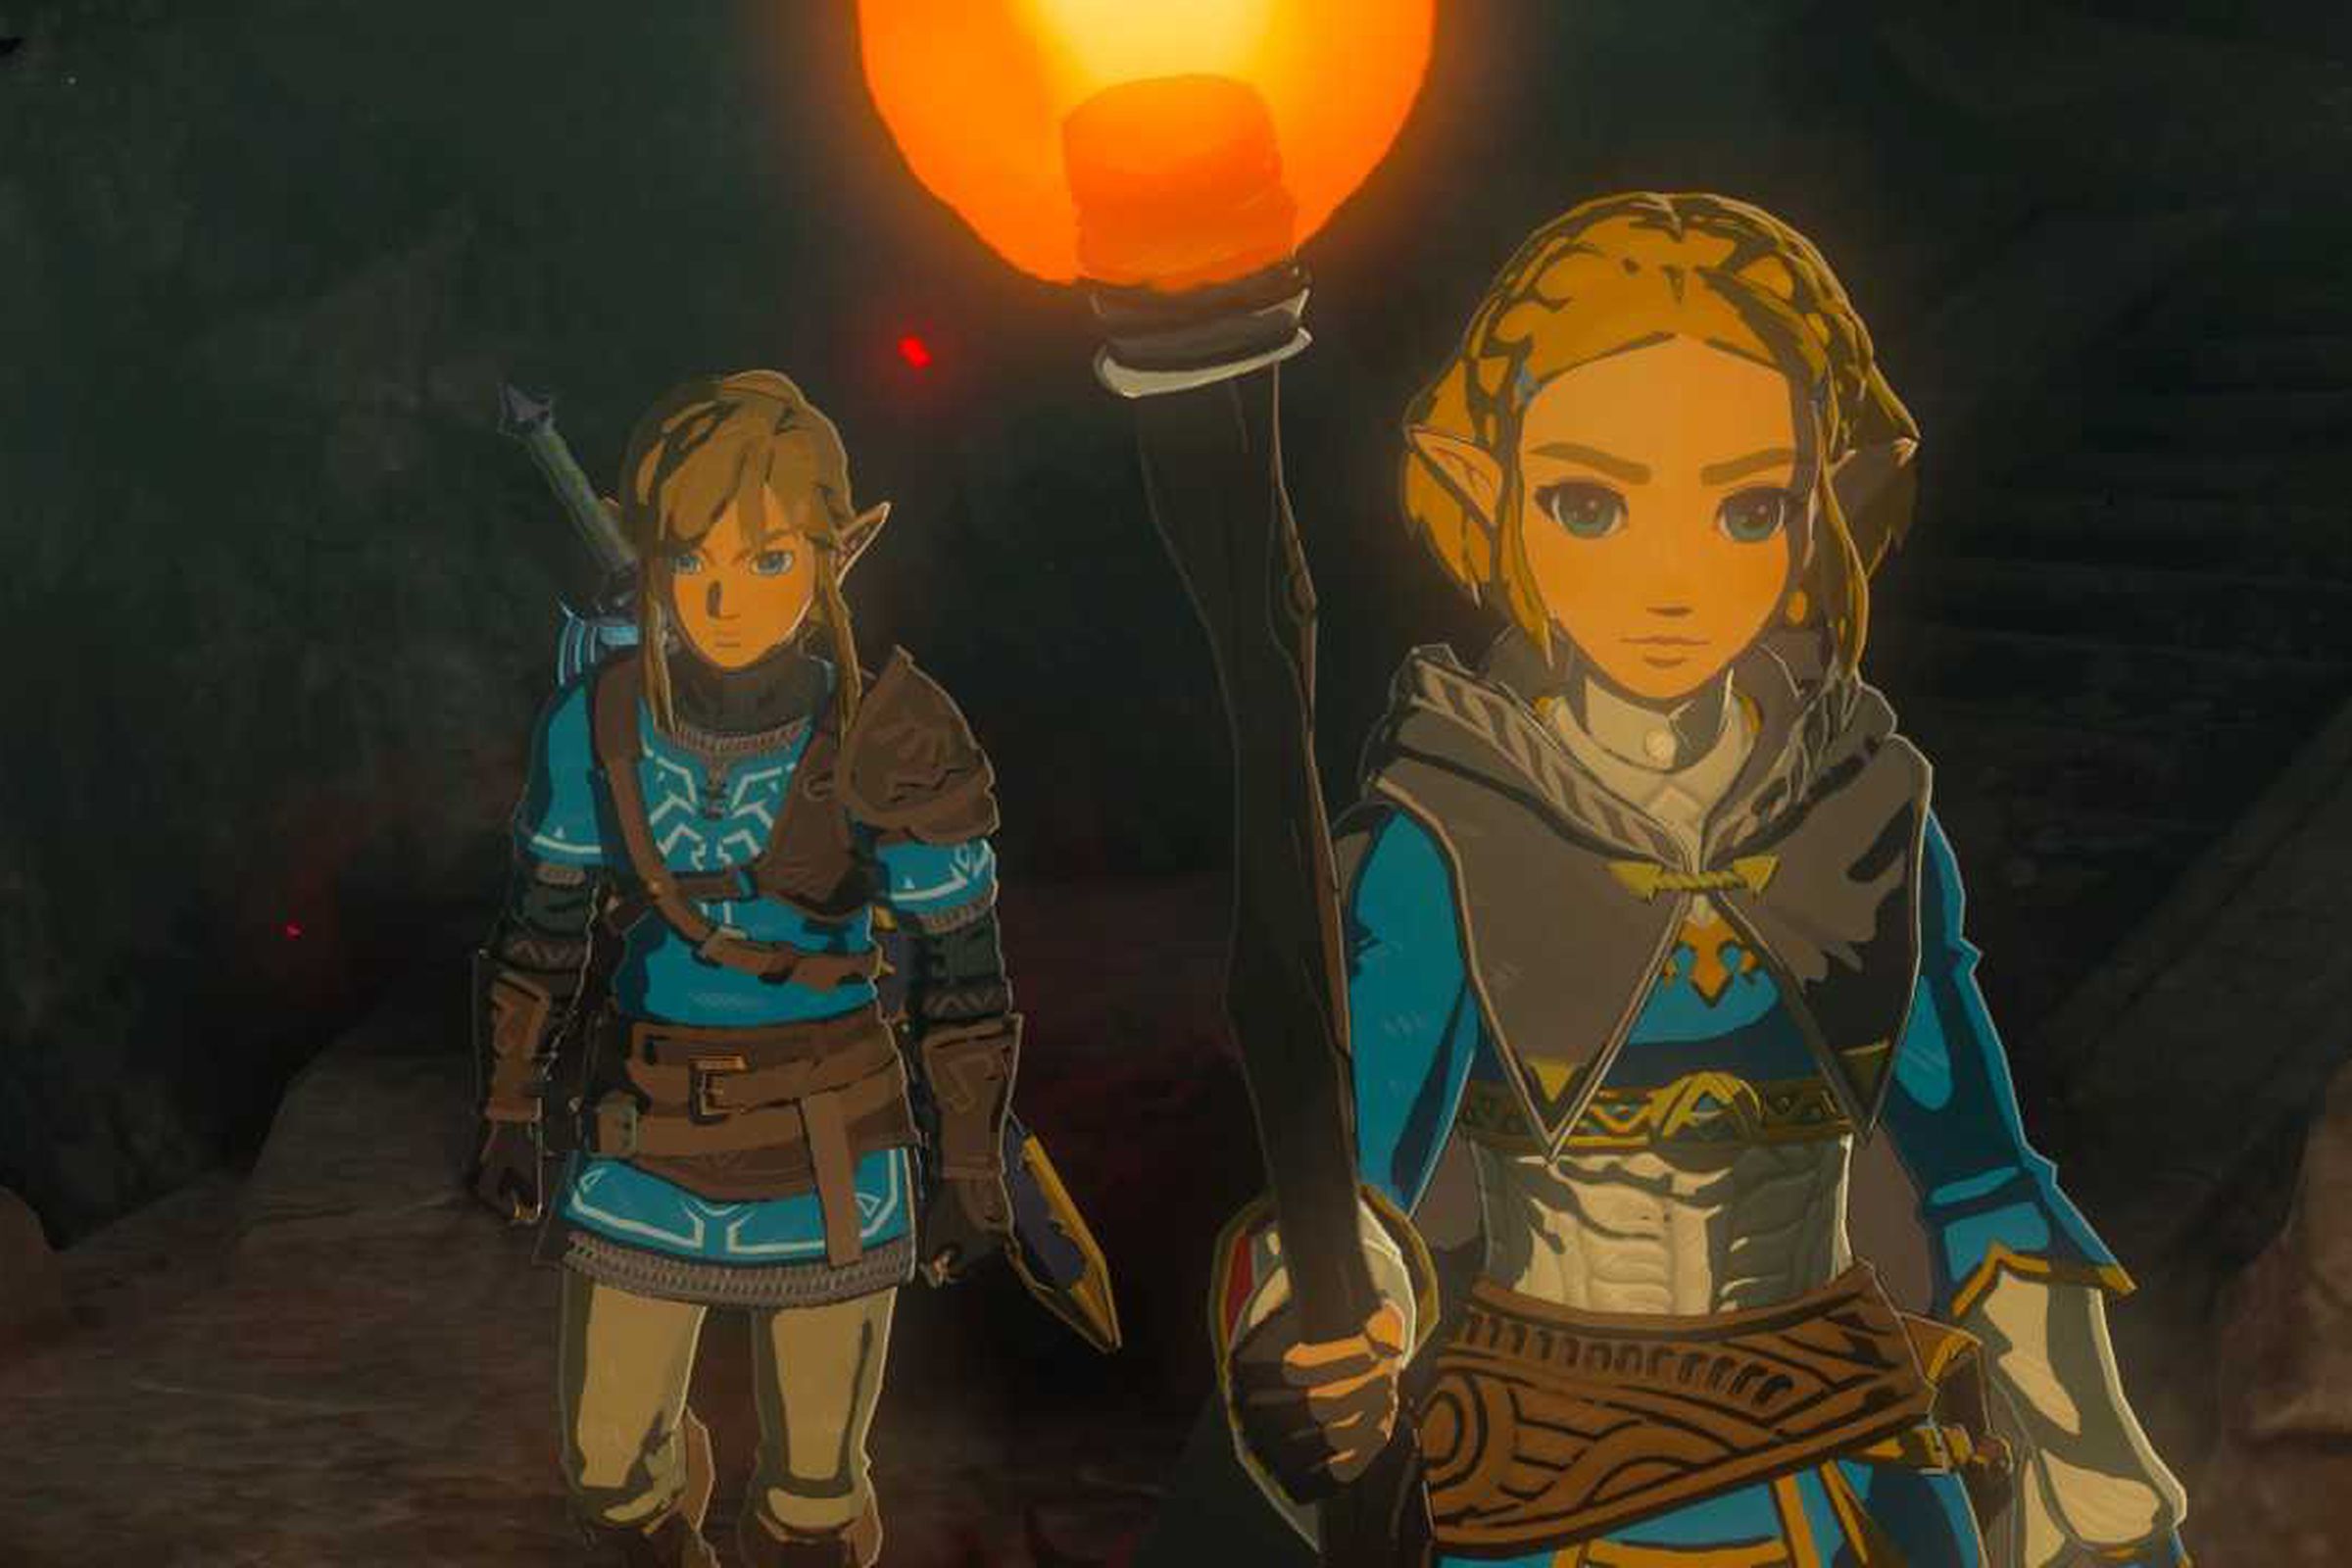 Screenshot from Tears of the Kingdom featuring Link and Zelda exploring a dark, torchlit cave